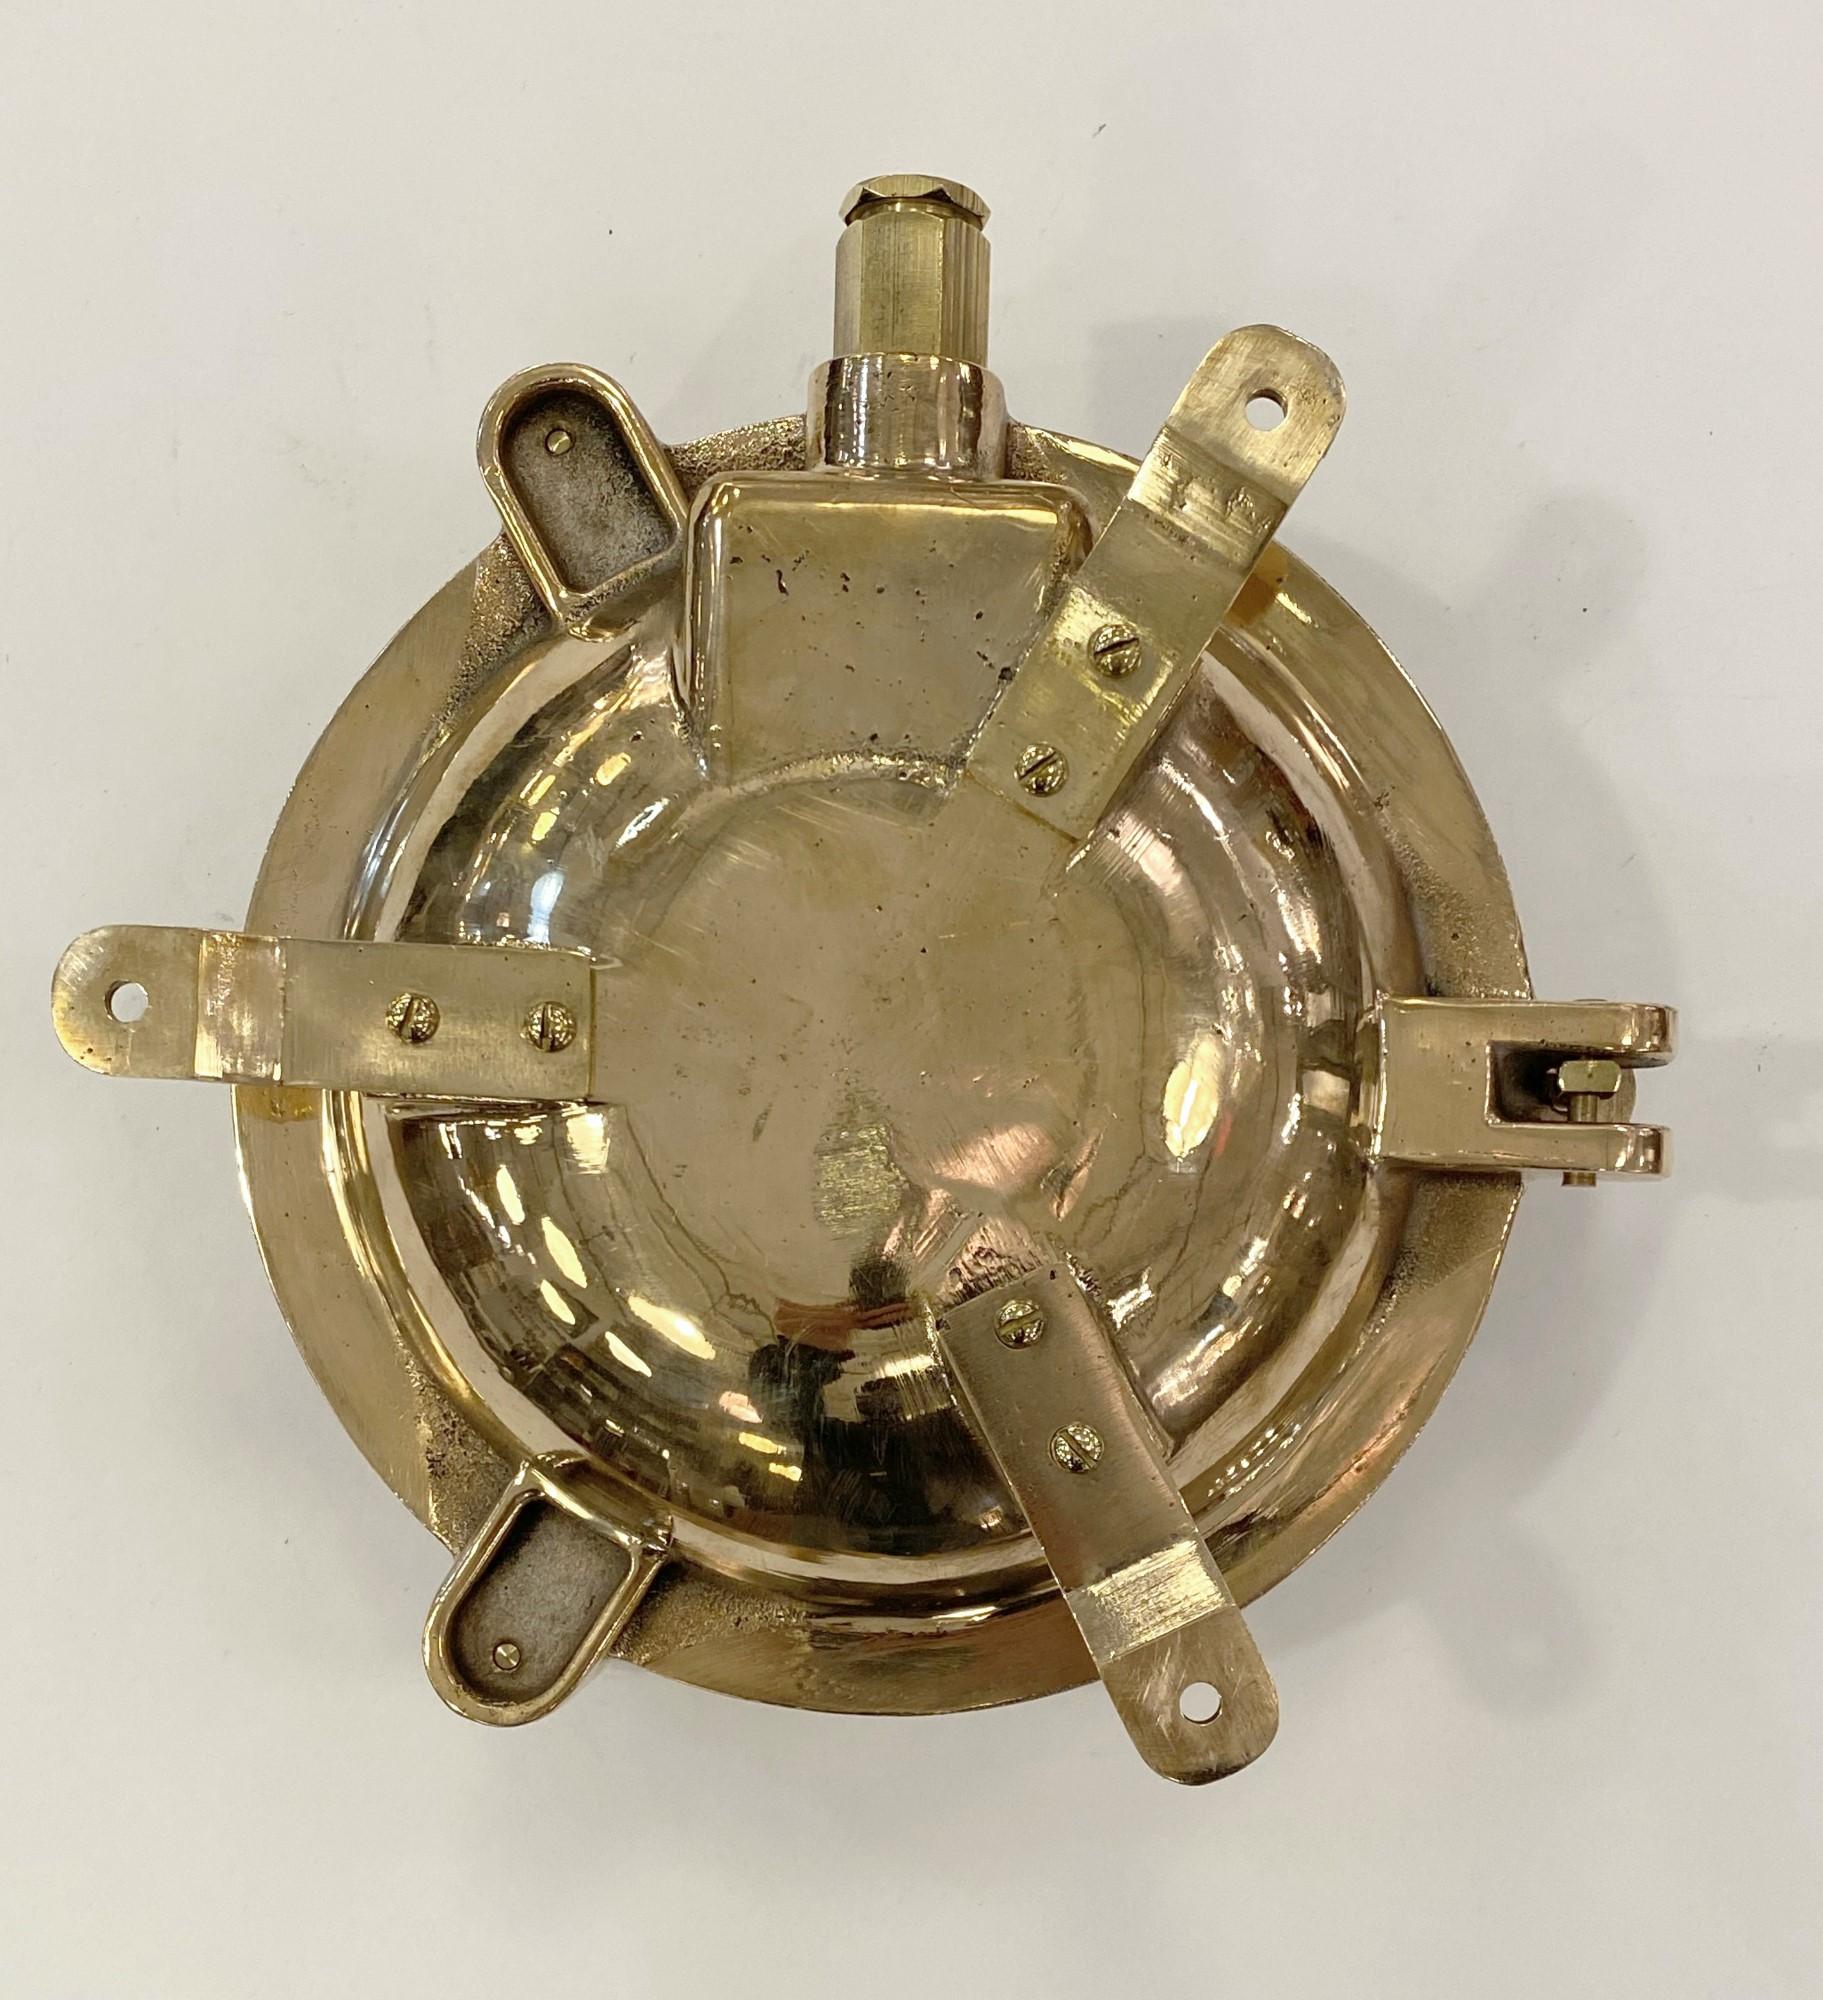 2010s Round Nautical Ship Light Sconce Cast Brass with Cage Bulkhead 2